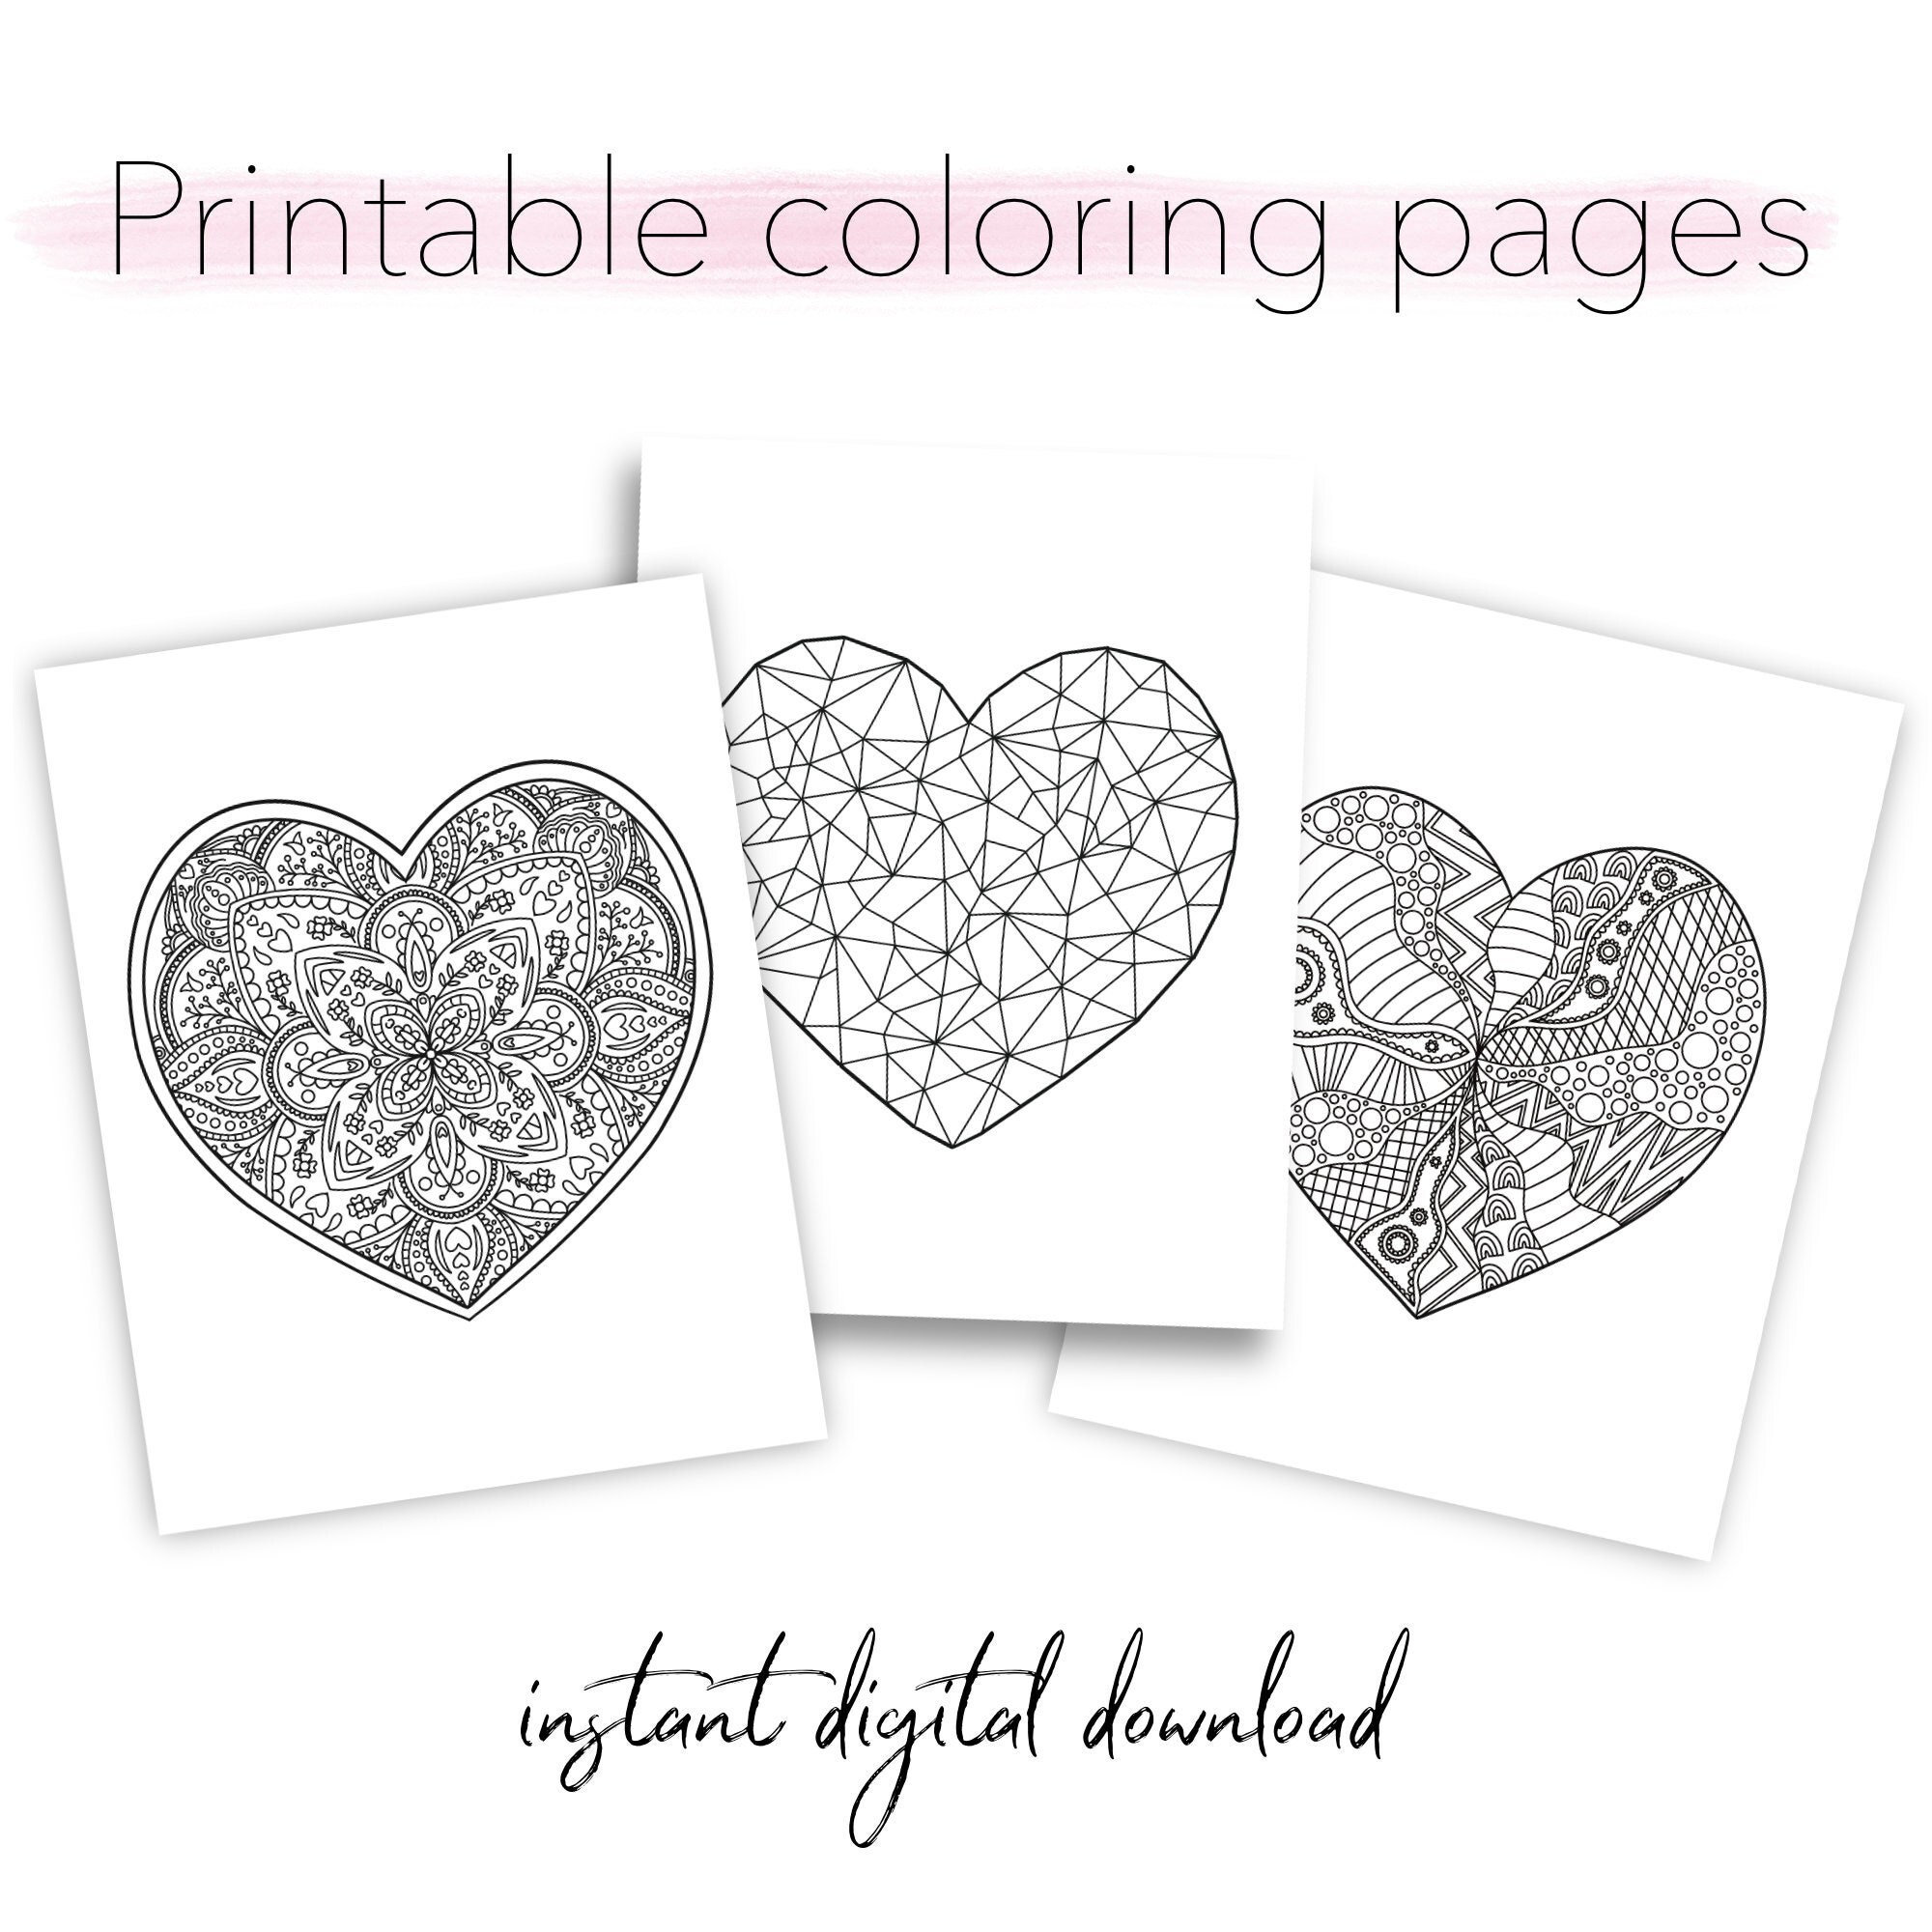 Printable heart coloring pages hand